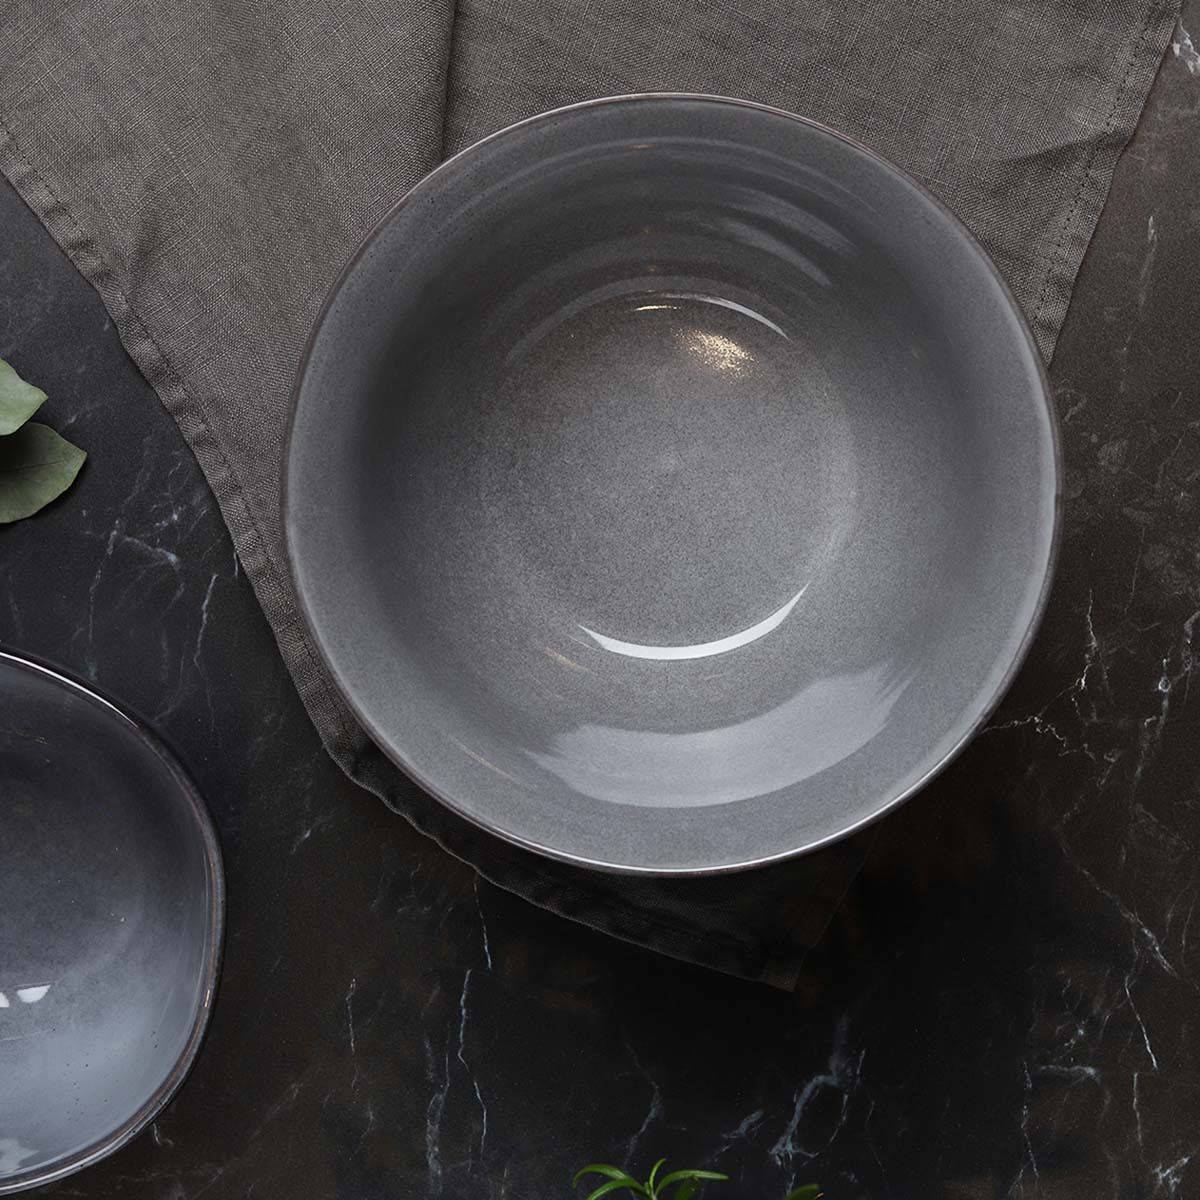 Capri Large Bowl in Grey for sale - Woodcock and Cavendish